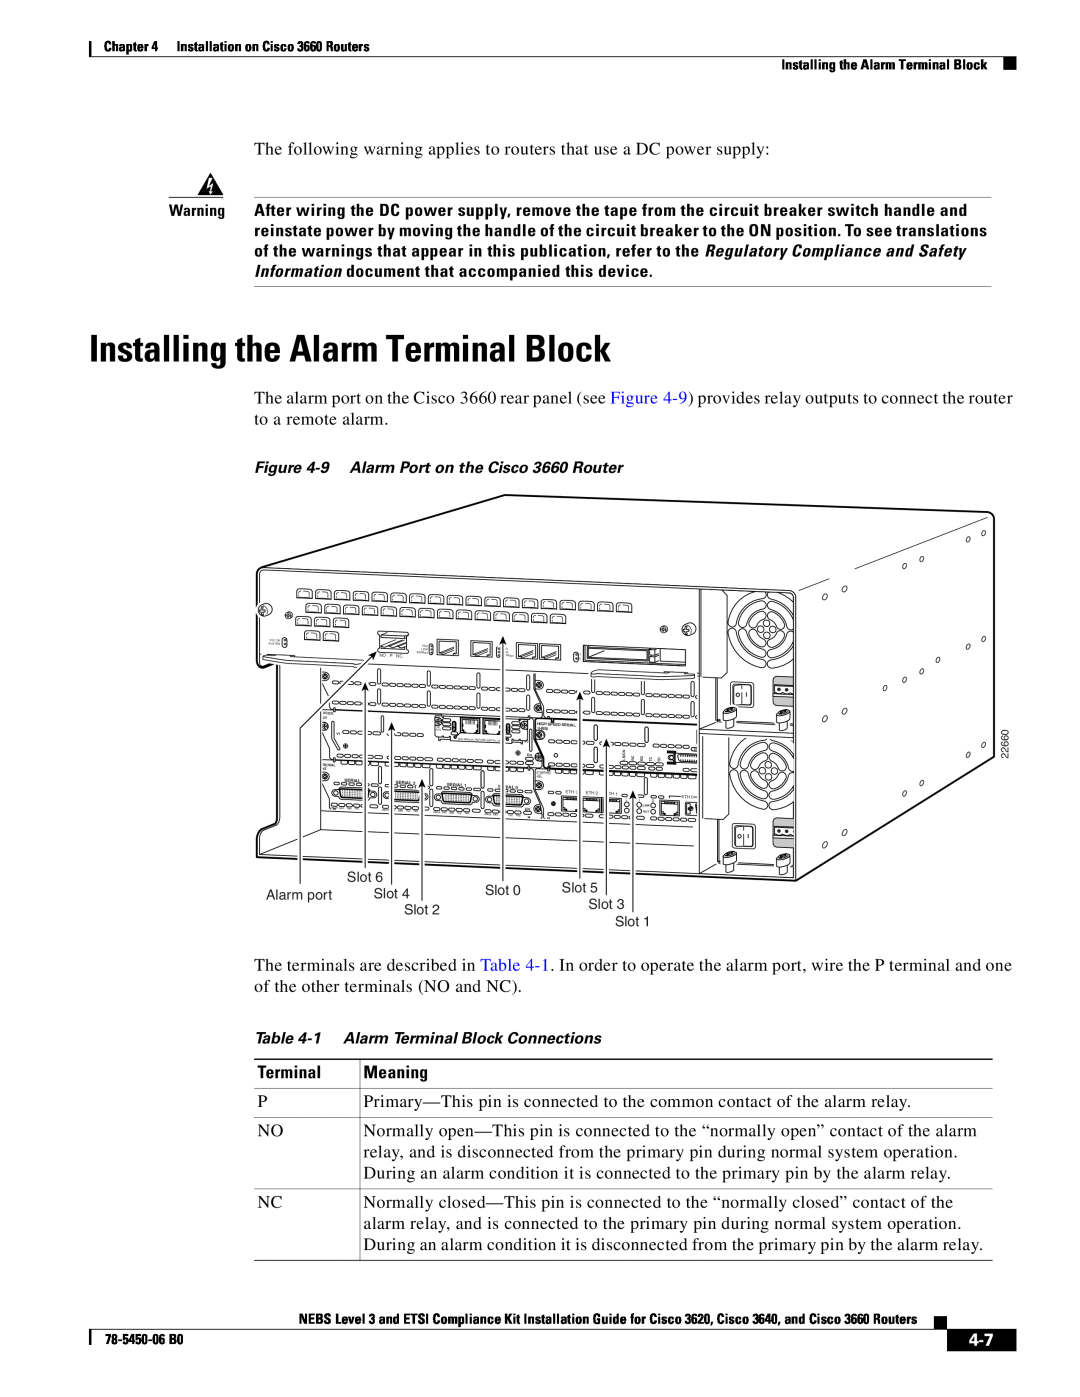 Cisco Systems 3660 manual Installing the Alarm Terminal Block, Meaning 